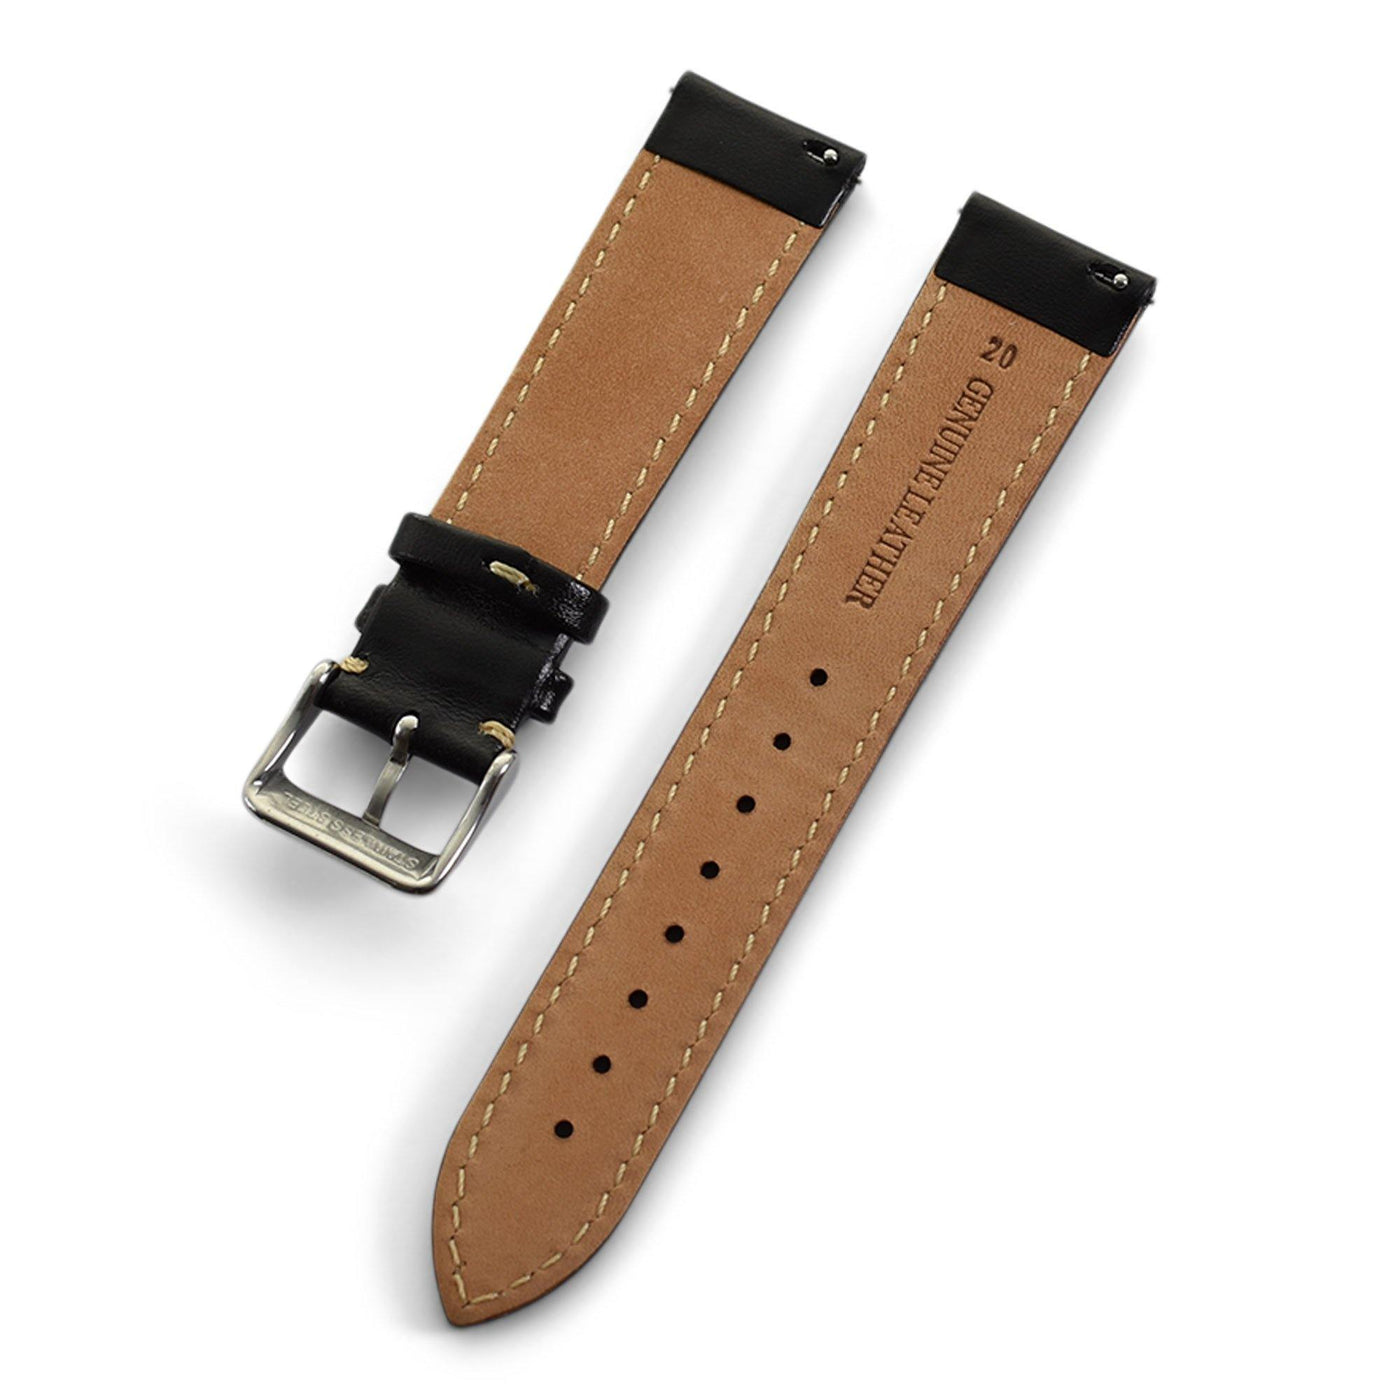 THE CHELSEA QUICK RELEASE BLACK - The Sydney Strap Co.